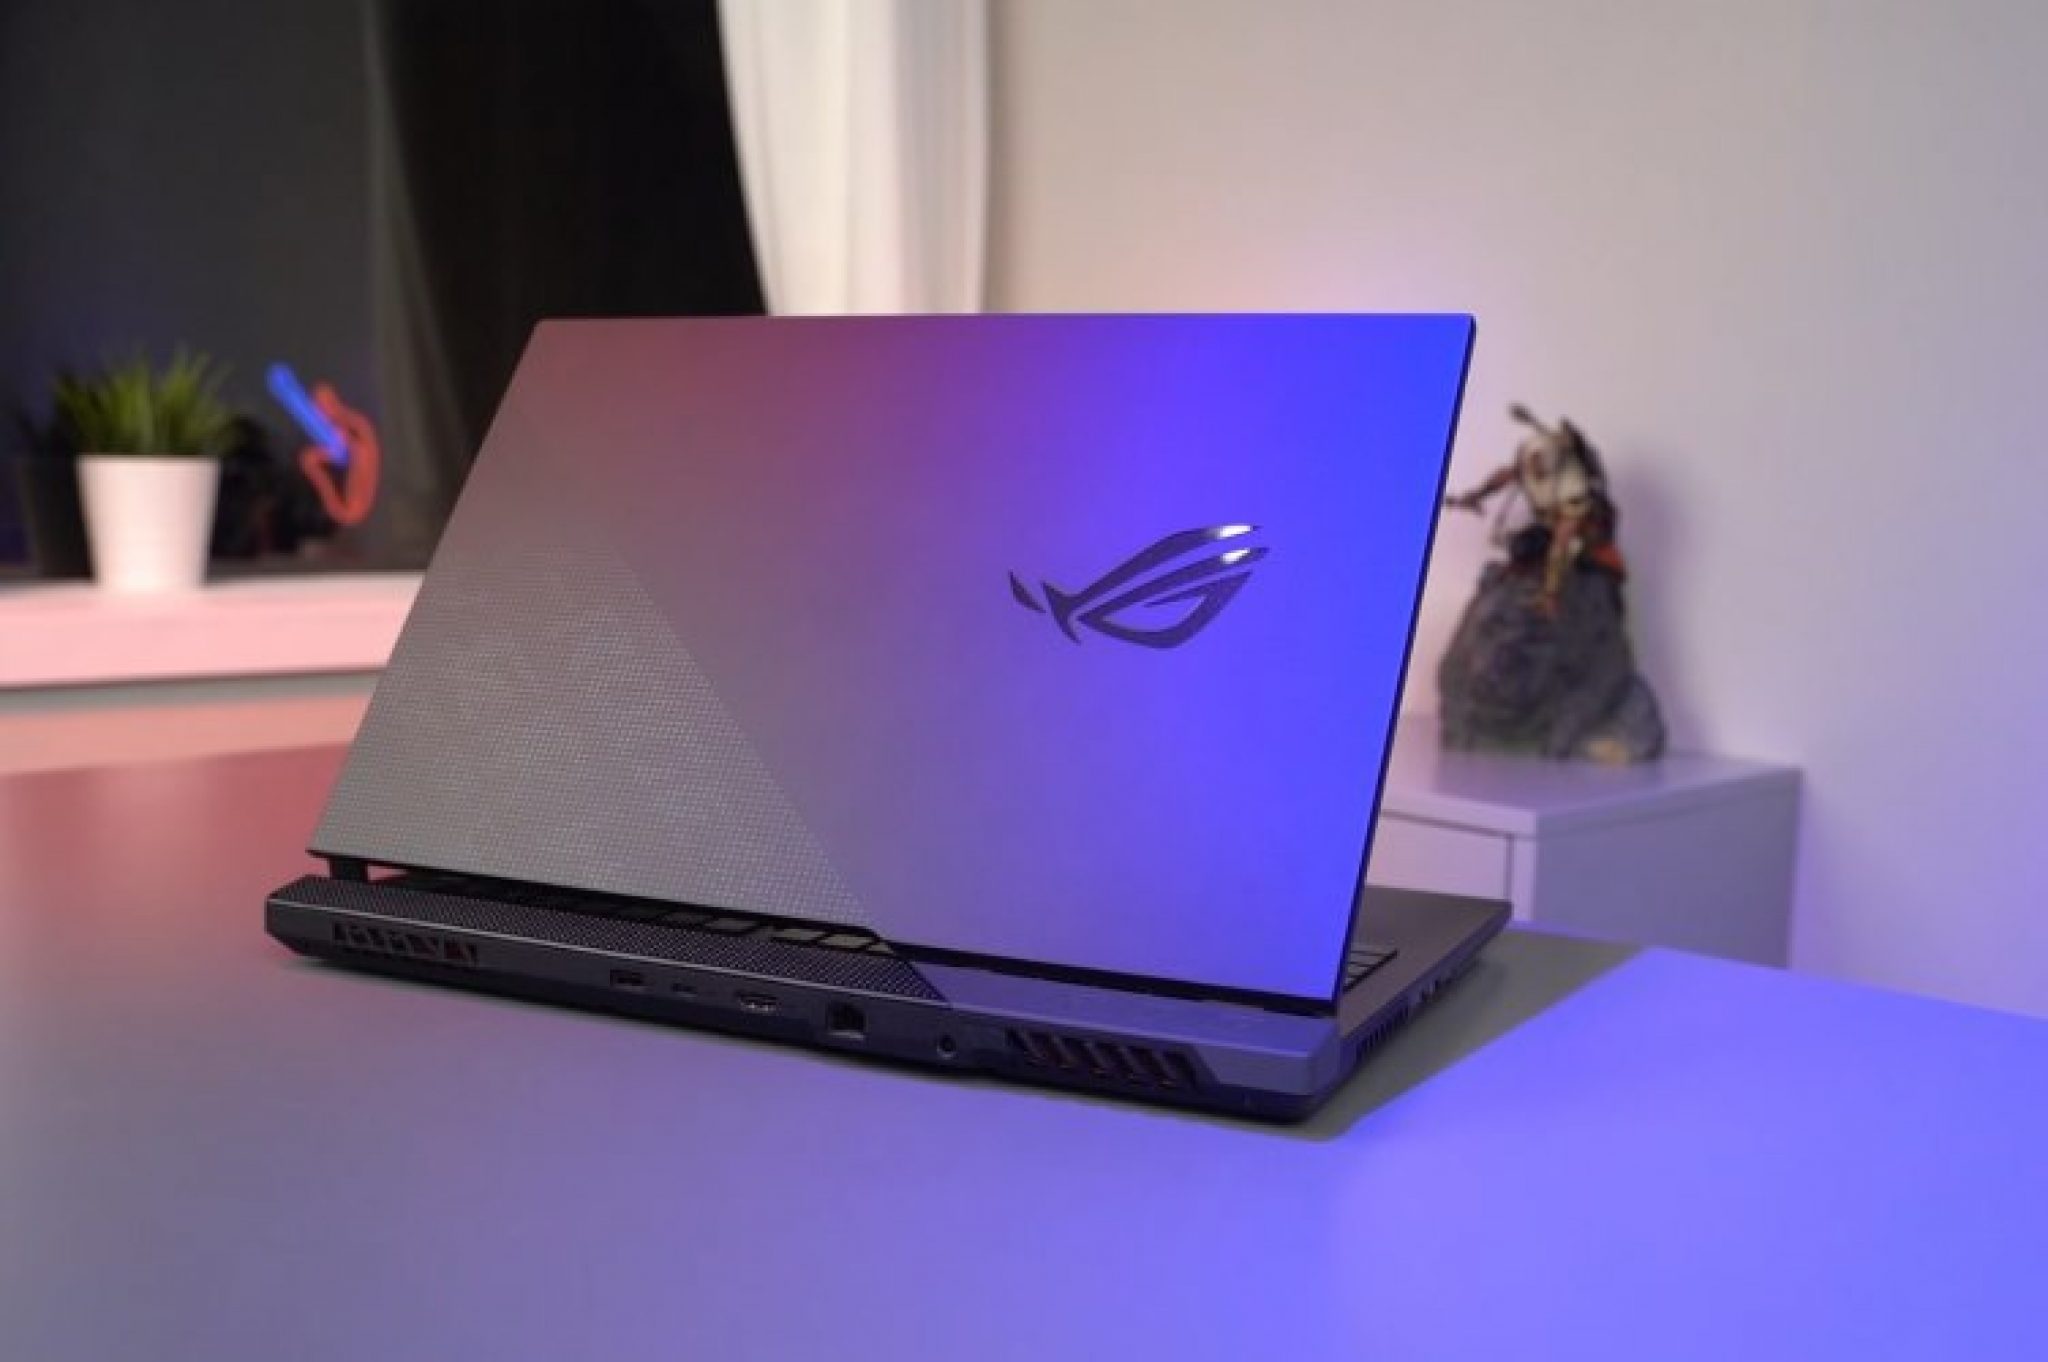 ASUS ROG Strix Scar 15 Is it Worth It? Review & Price